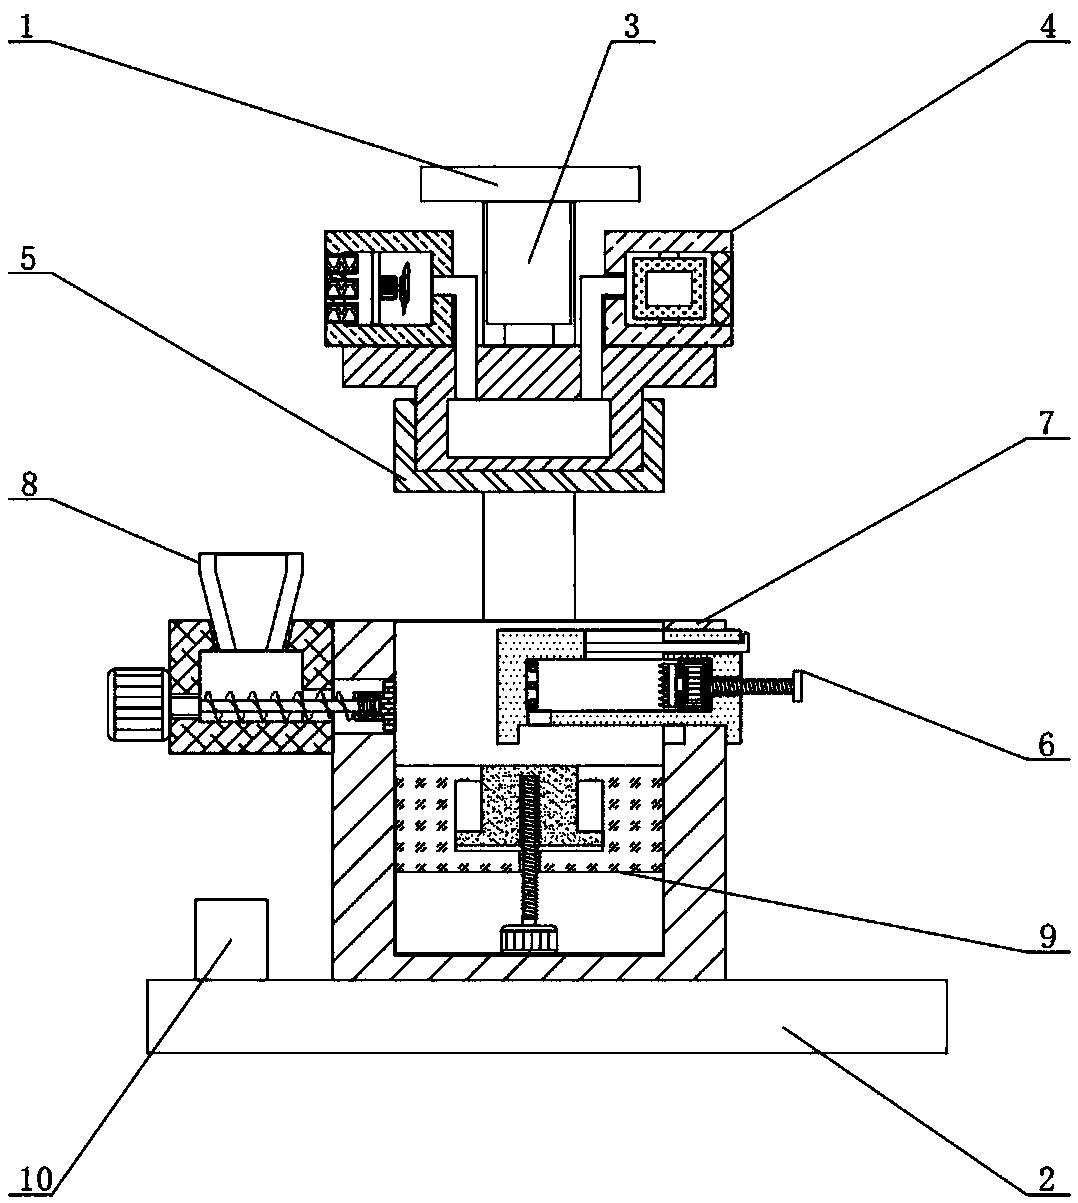 Shell machining device for ammeter production